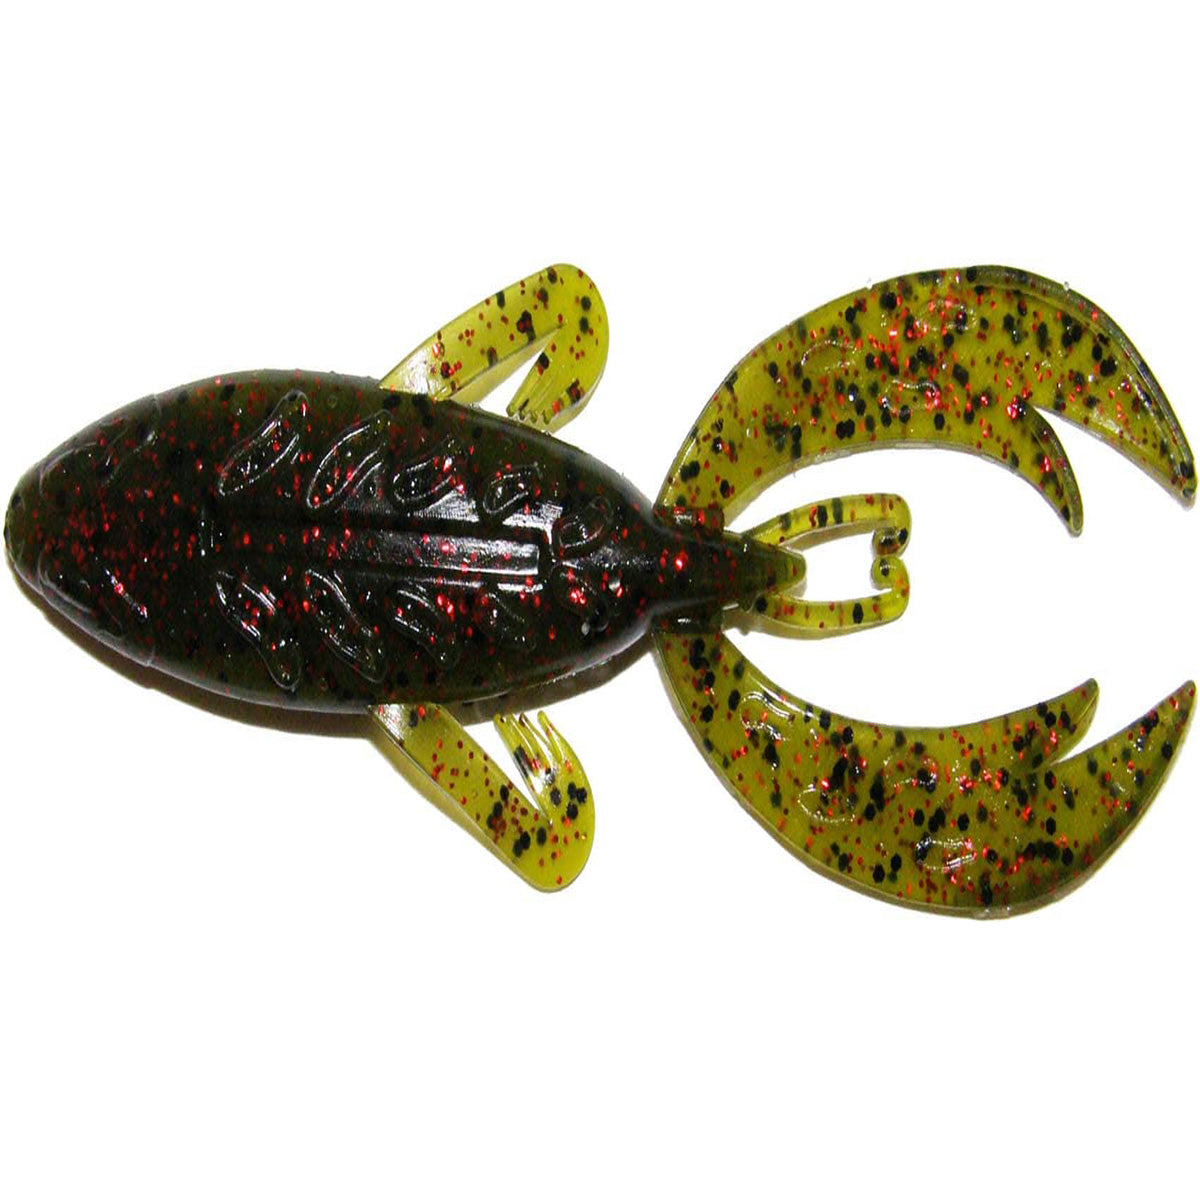 Big Bite Baits Rojas Fighting Frog 4 in Frog Baits 7-Pack